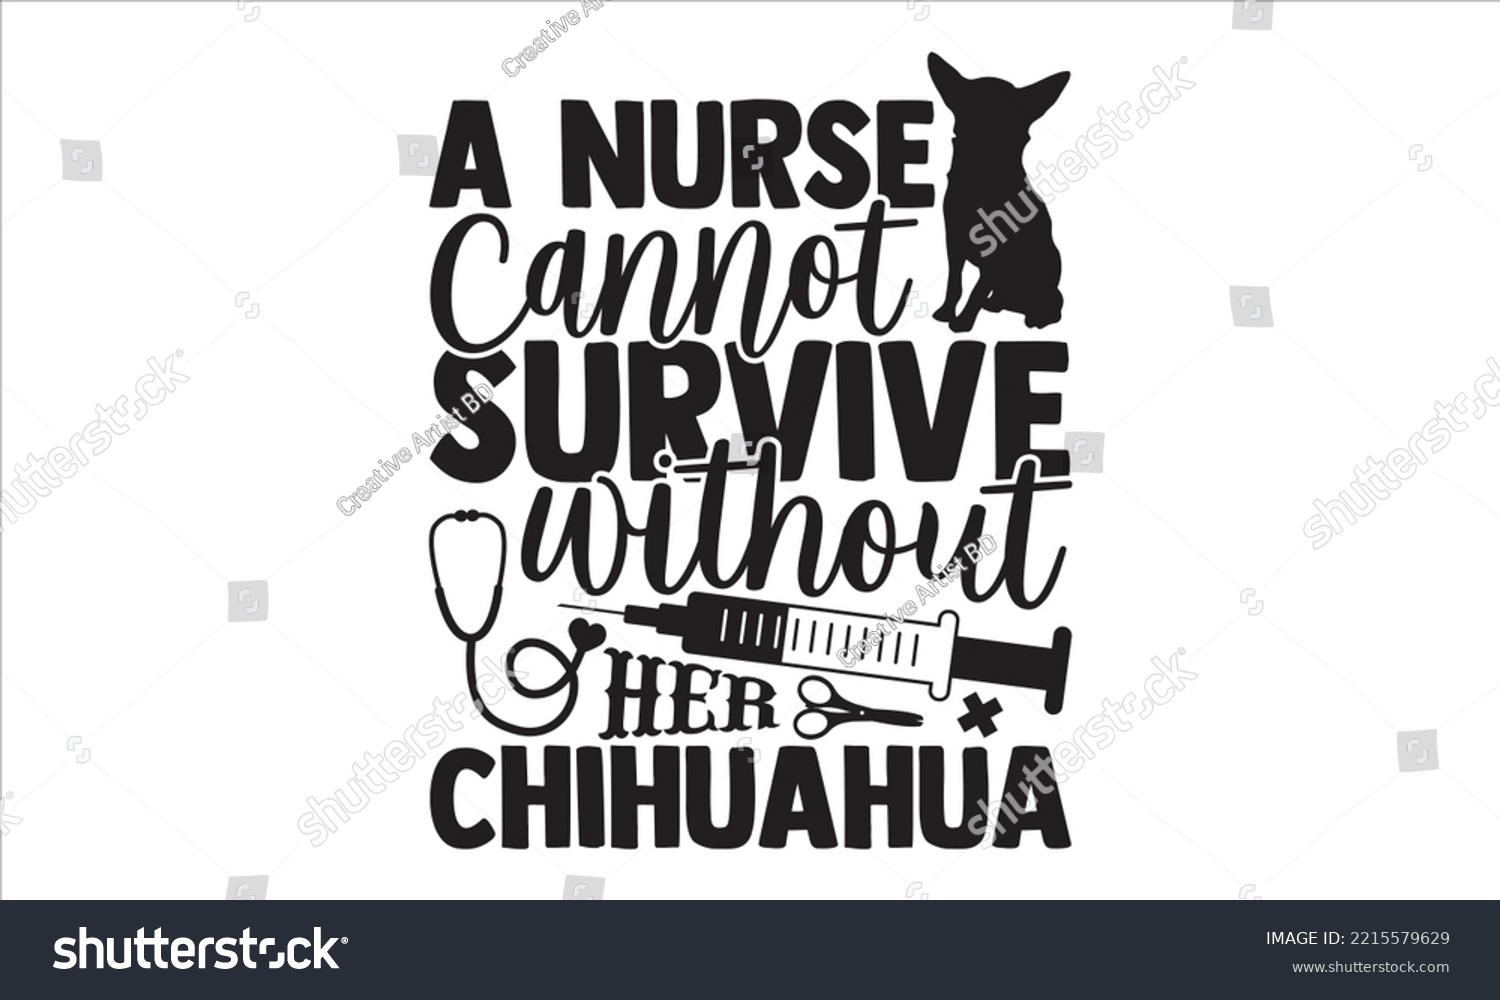 SVG of A Nurse Cannot Survive Without Her Chihuahua - Chihuahua T shirt Design, Modern calligraphy, Cut Files for Cricut Svg, Illustration for prints on bags, posters svg